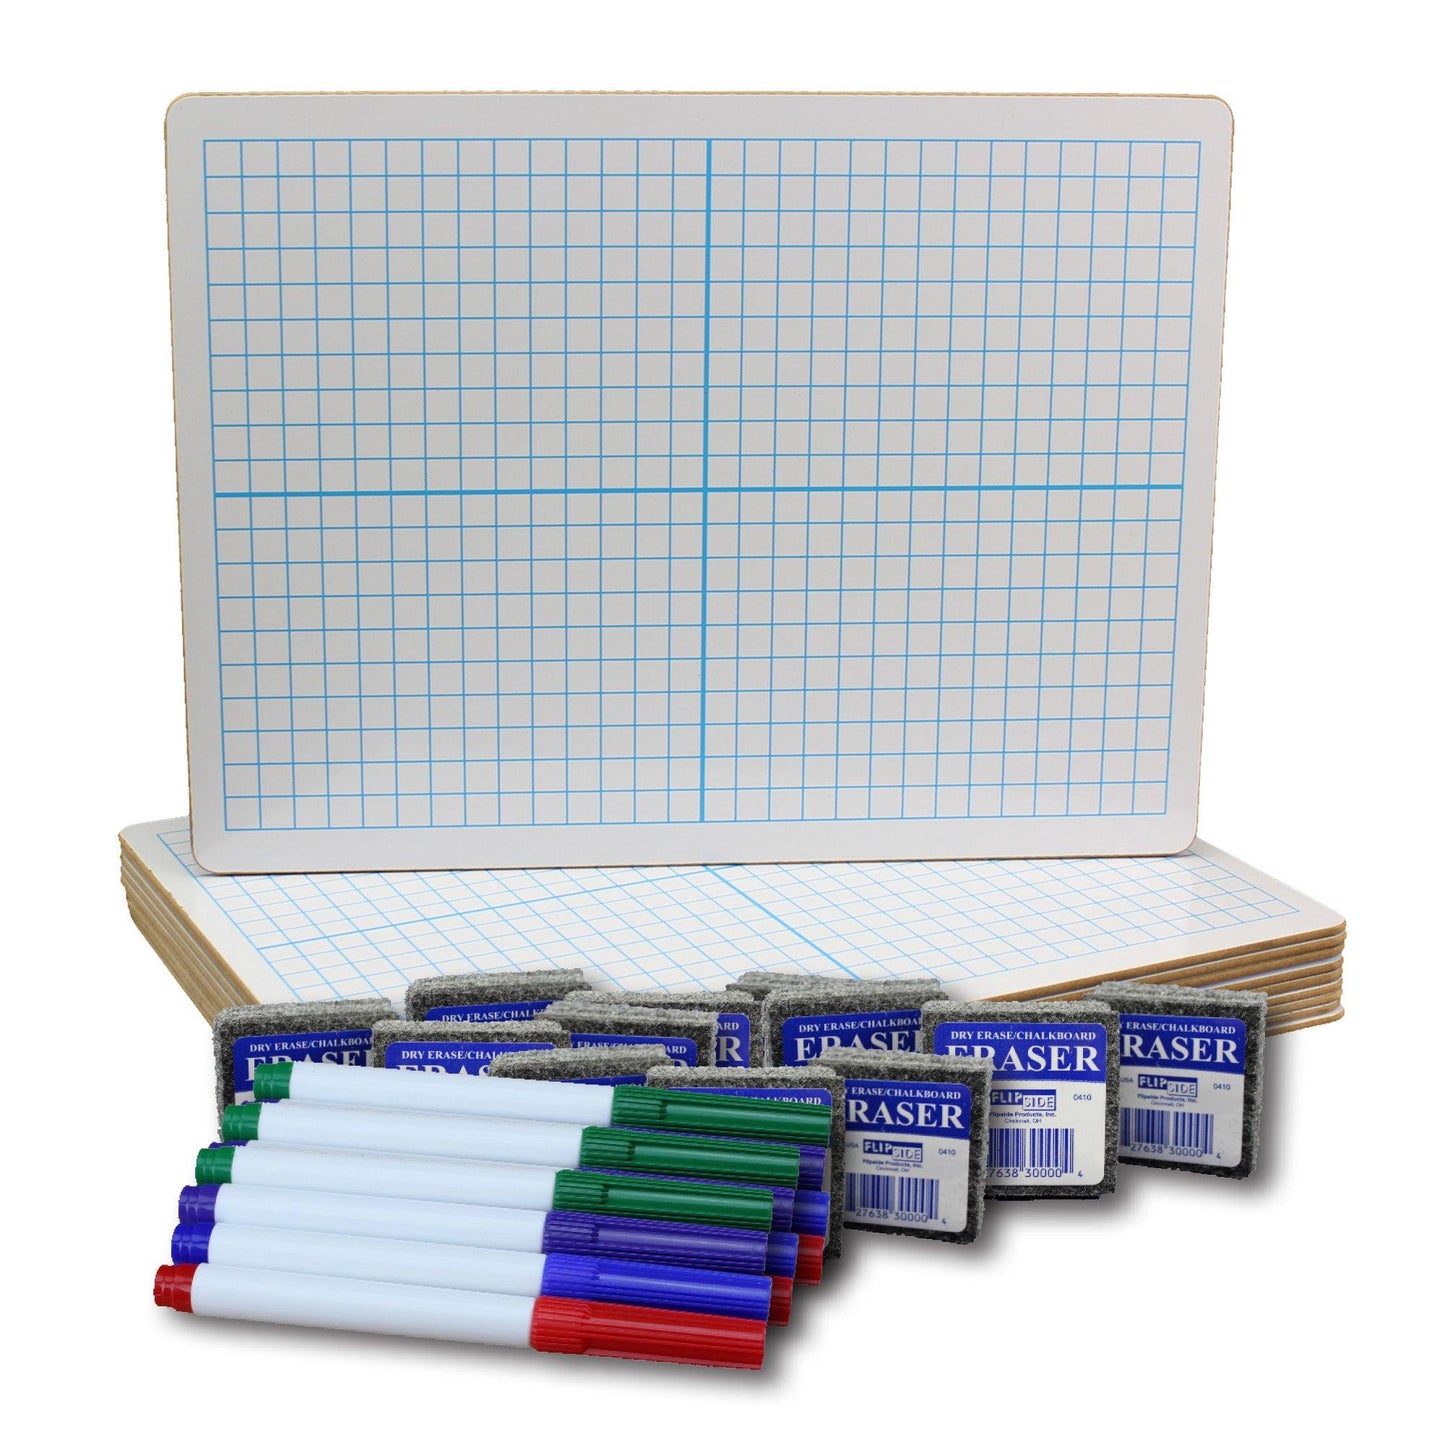 Two-Sided Dry Erase Boards, XY Axis/Plain, 9" x 12", with Colored Pens & Erasers, Class Pack of 12 - Loomini